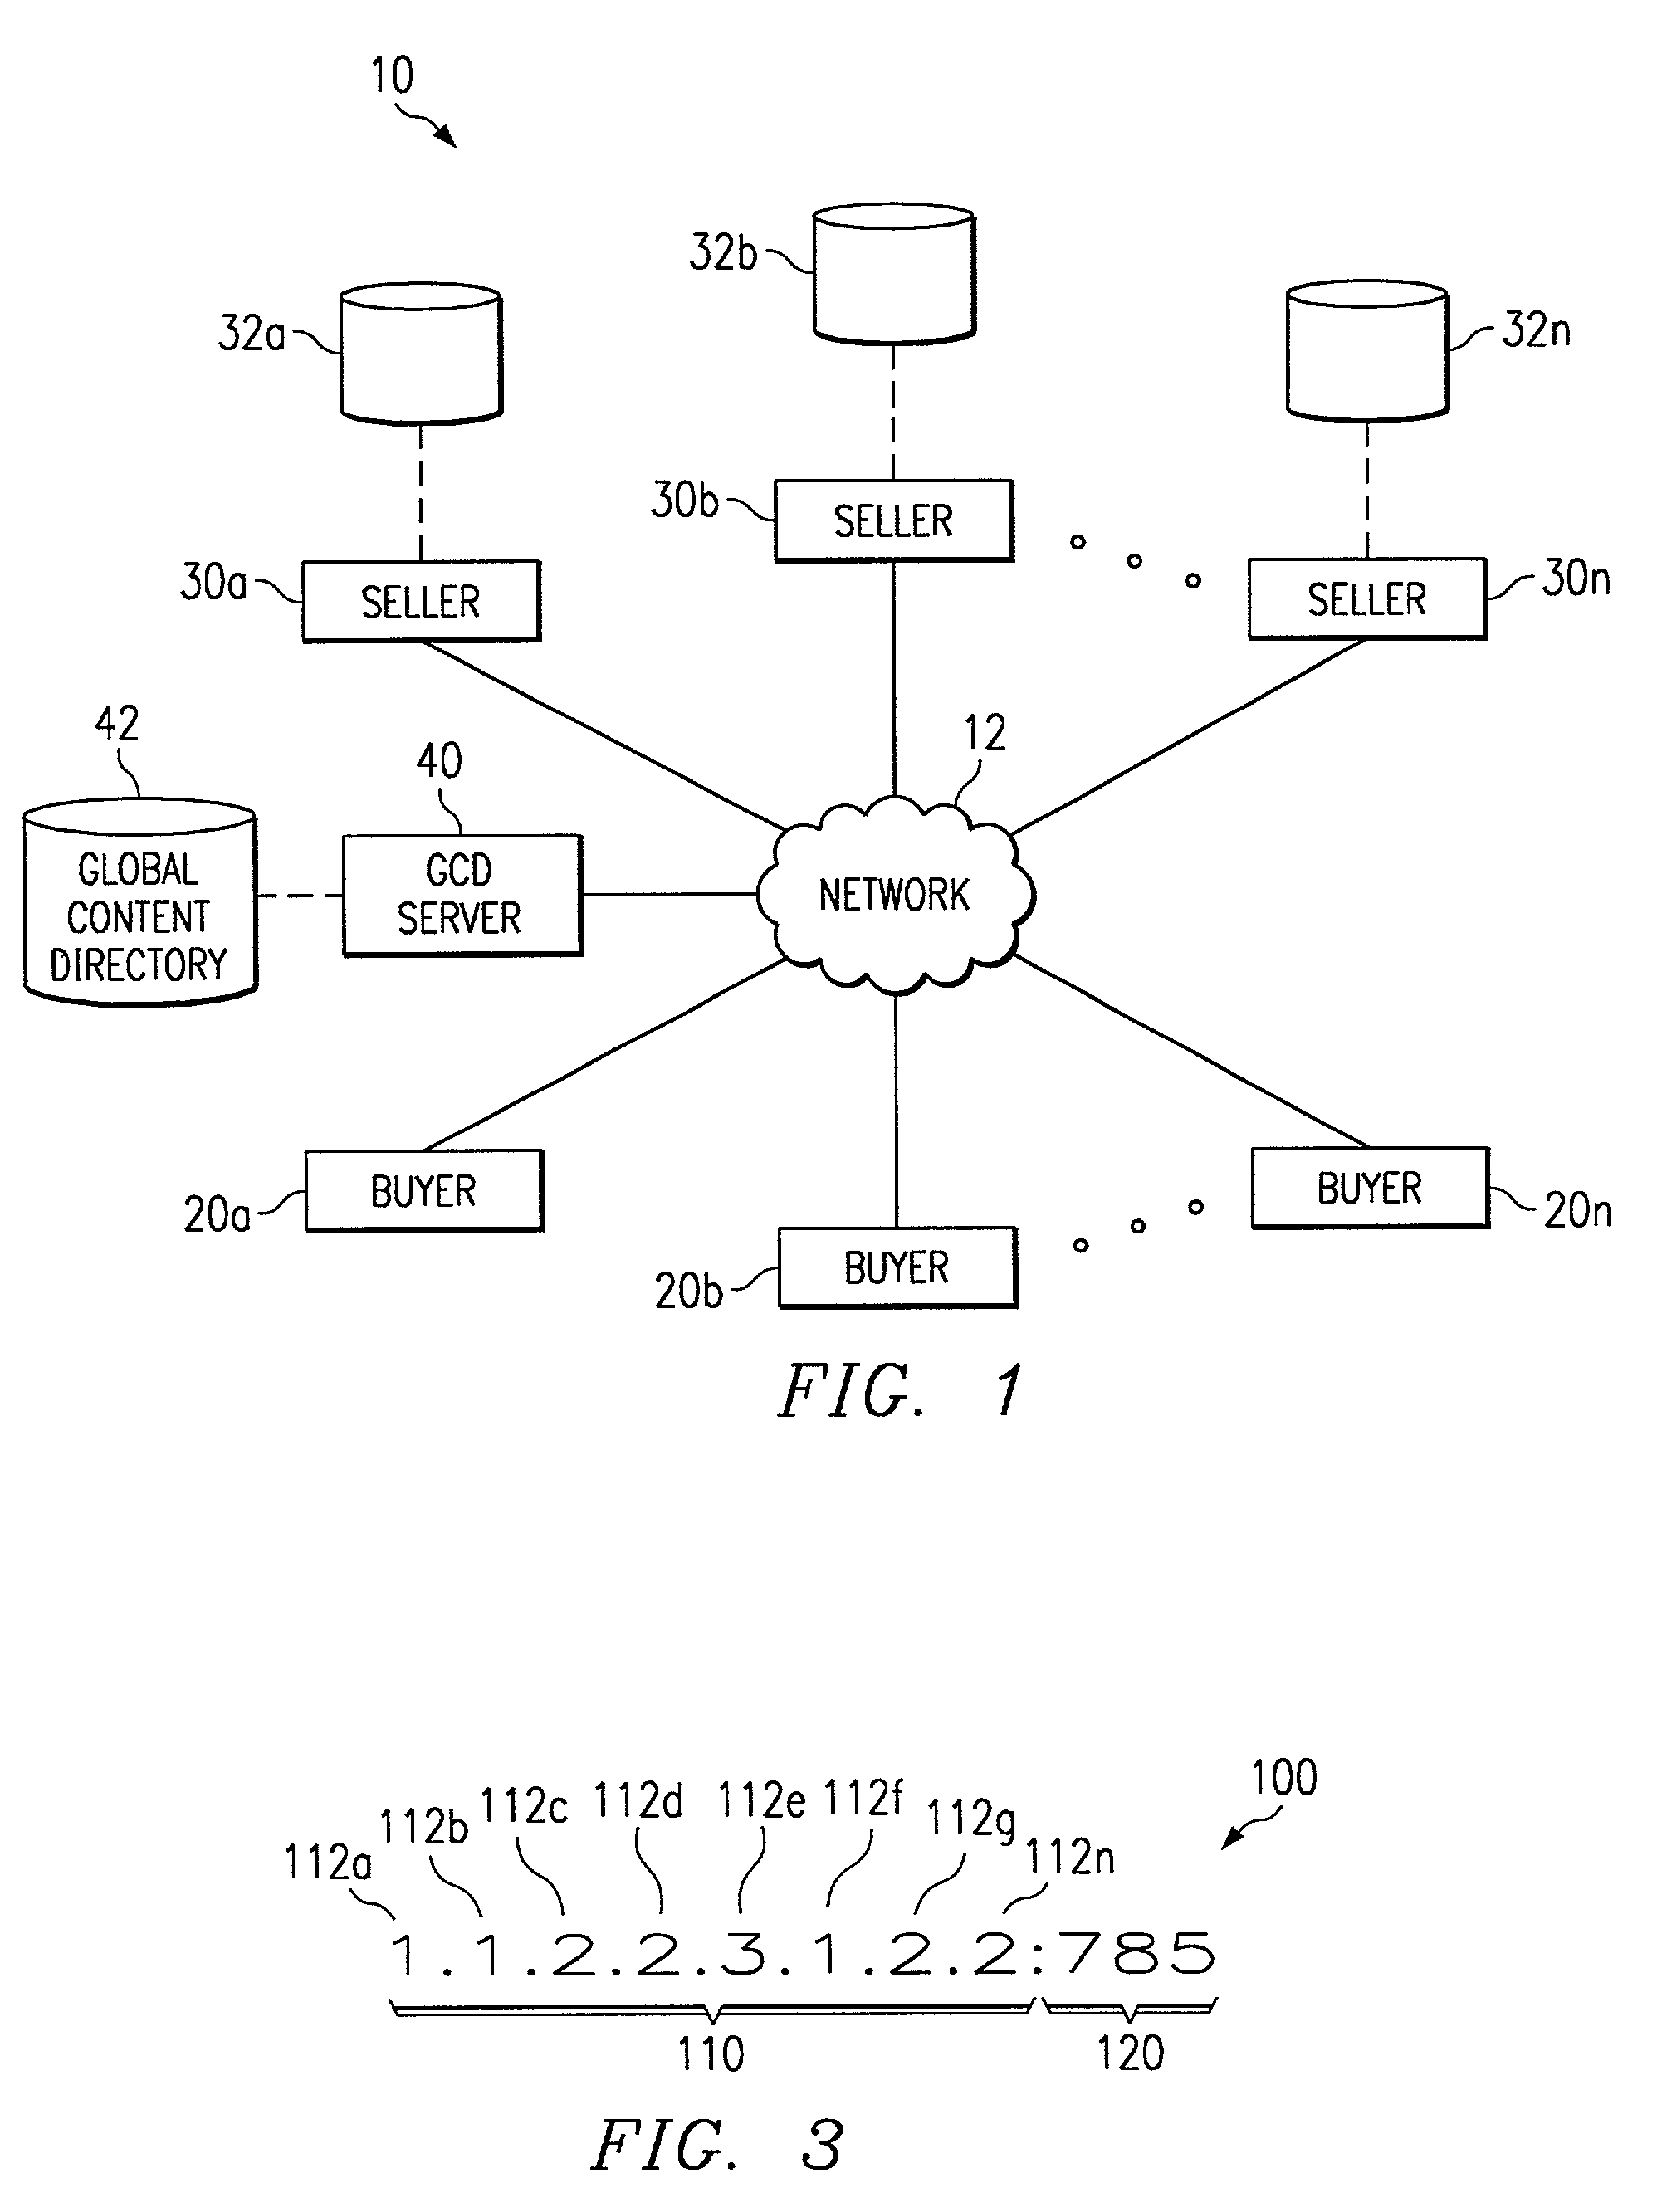 System and method for migrating data in an electronic commerce system